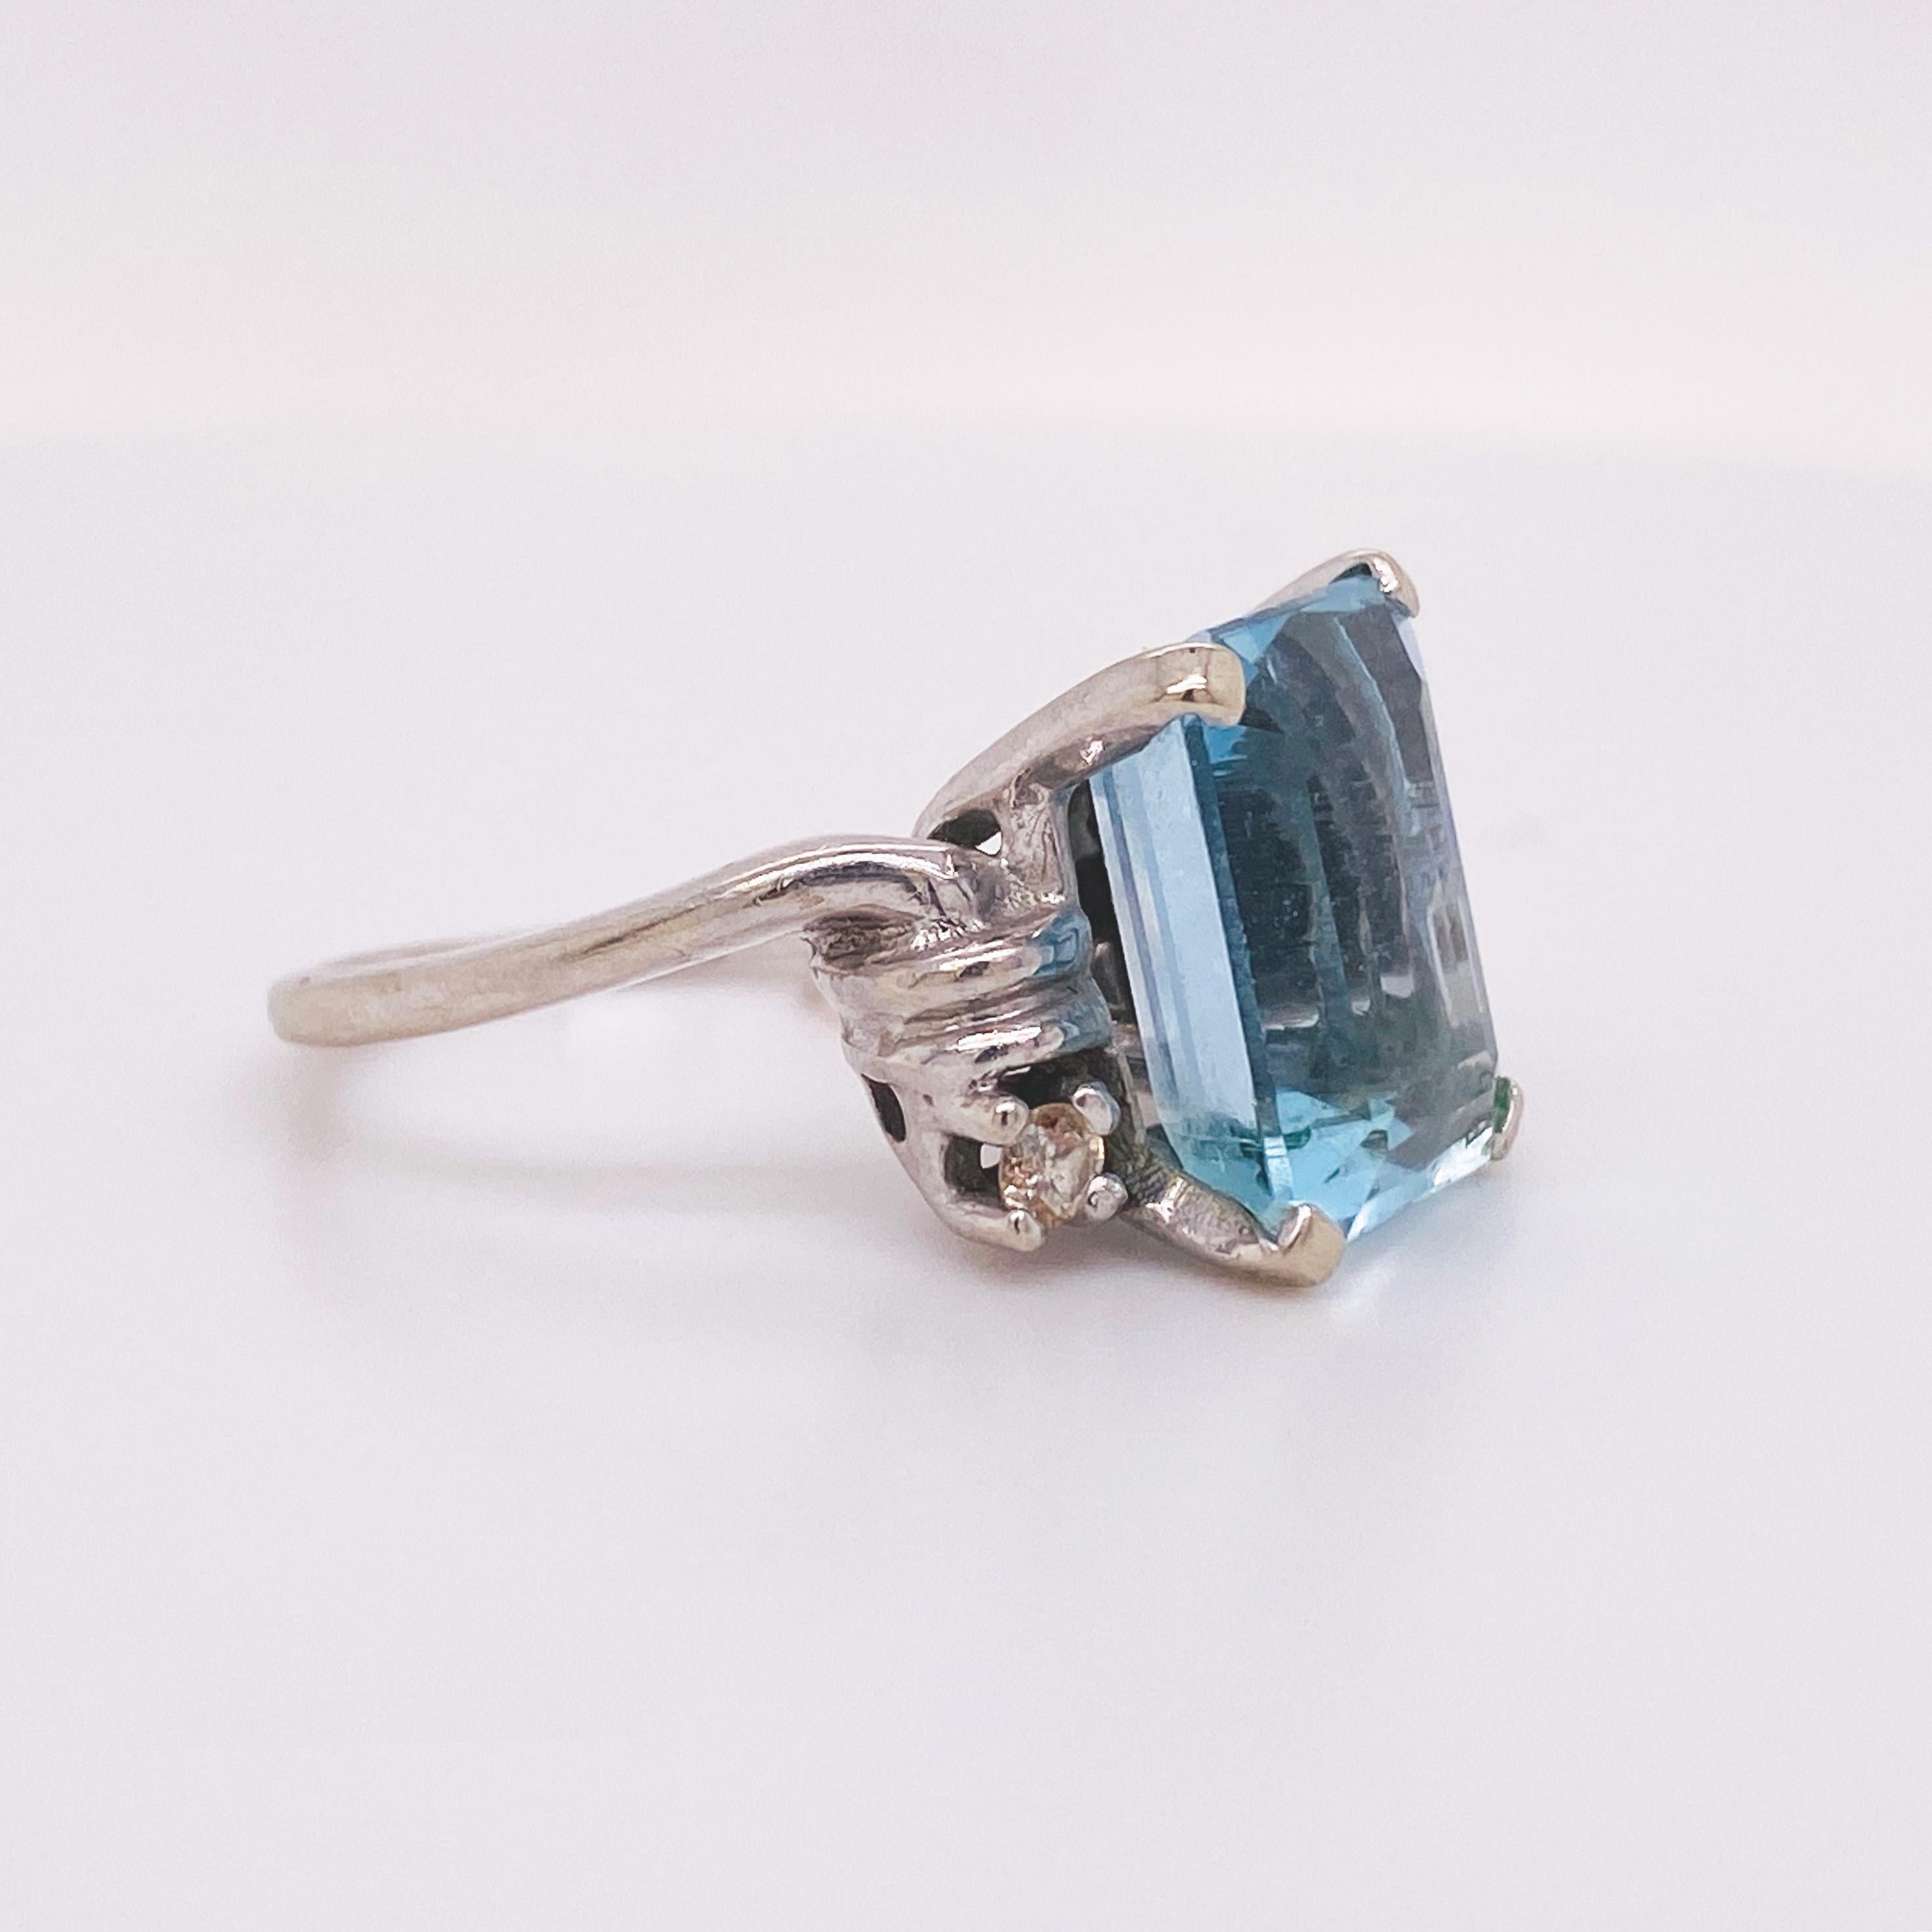 This is a fabulous Art Deco ring circa 1935. This classic emerald cut aquamarine ring has a gorgeous look accented on either side with genuine natural diamonds. The 14 karat white gold is a cool color metal that is gorgeous with the cool blue color